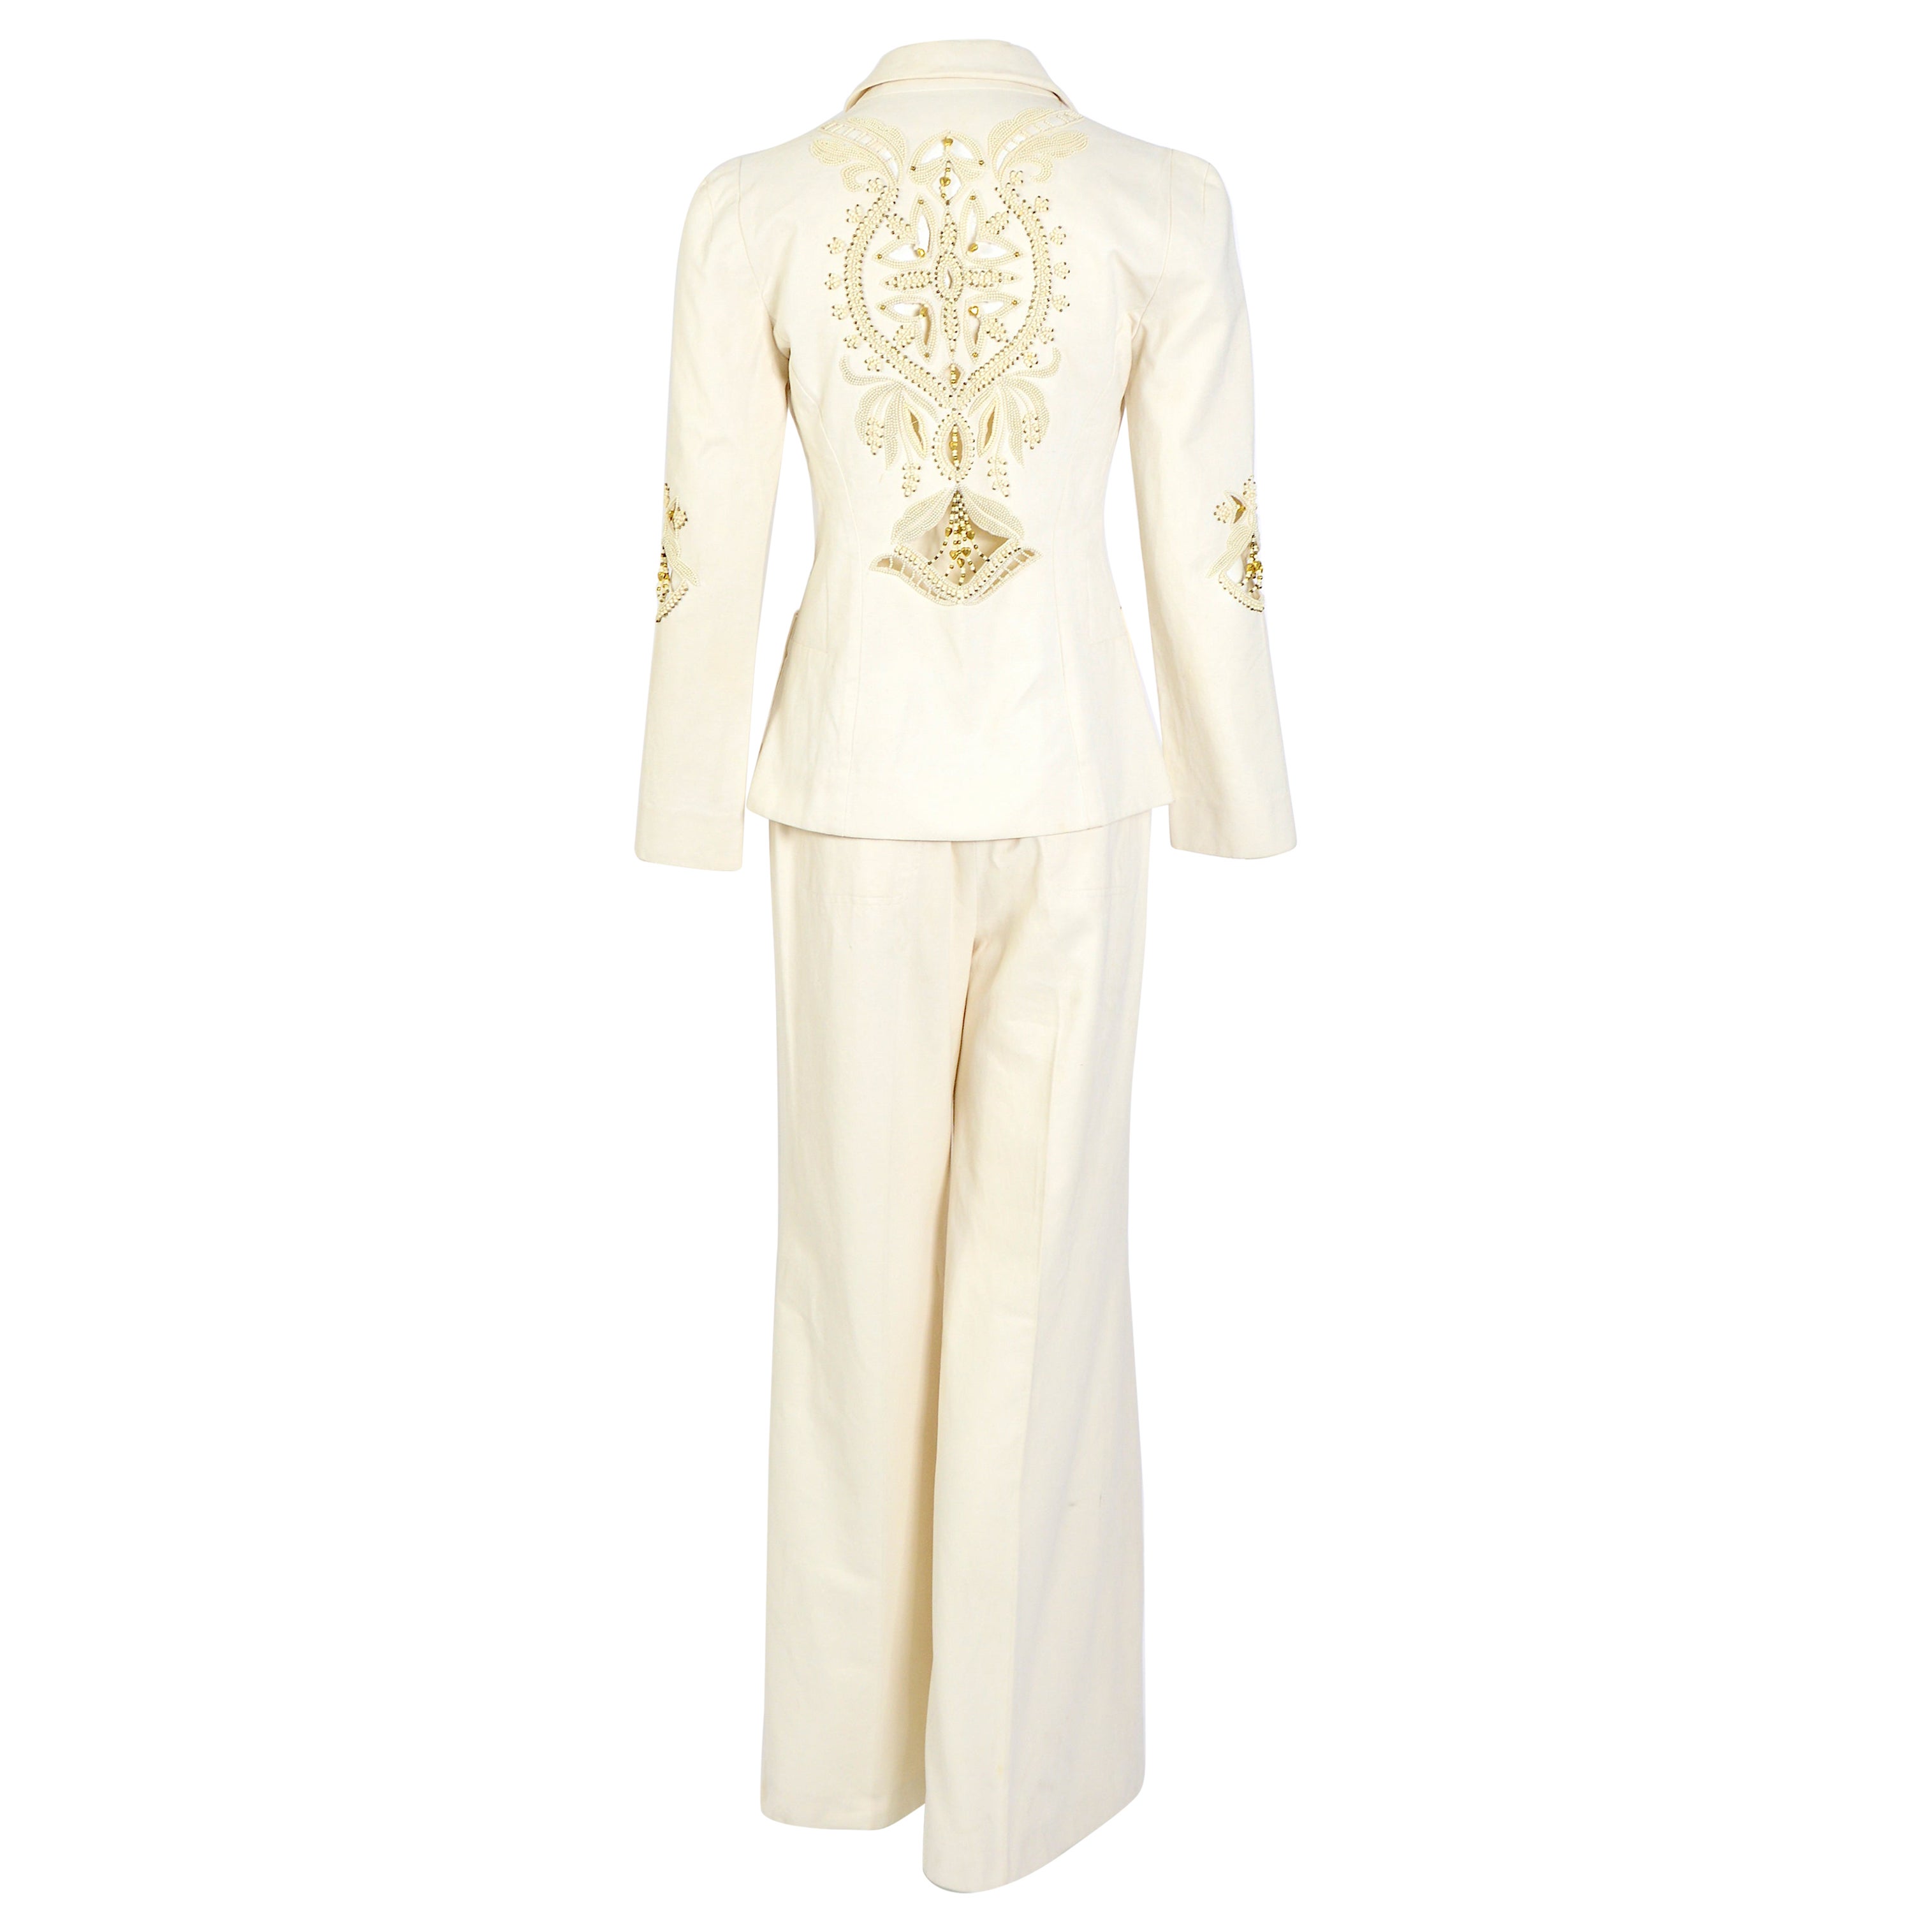 Chloé by Phoebe Philo vintage S/S 2002 embellished back and sleeves cream suit For Sale